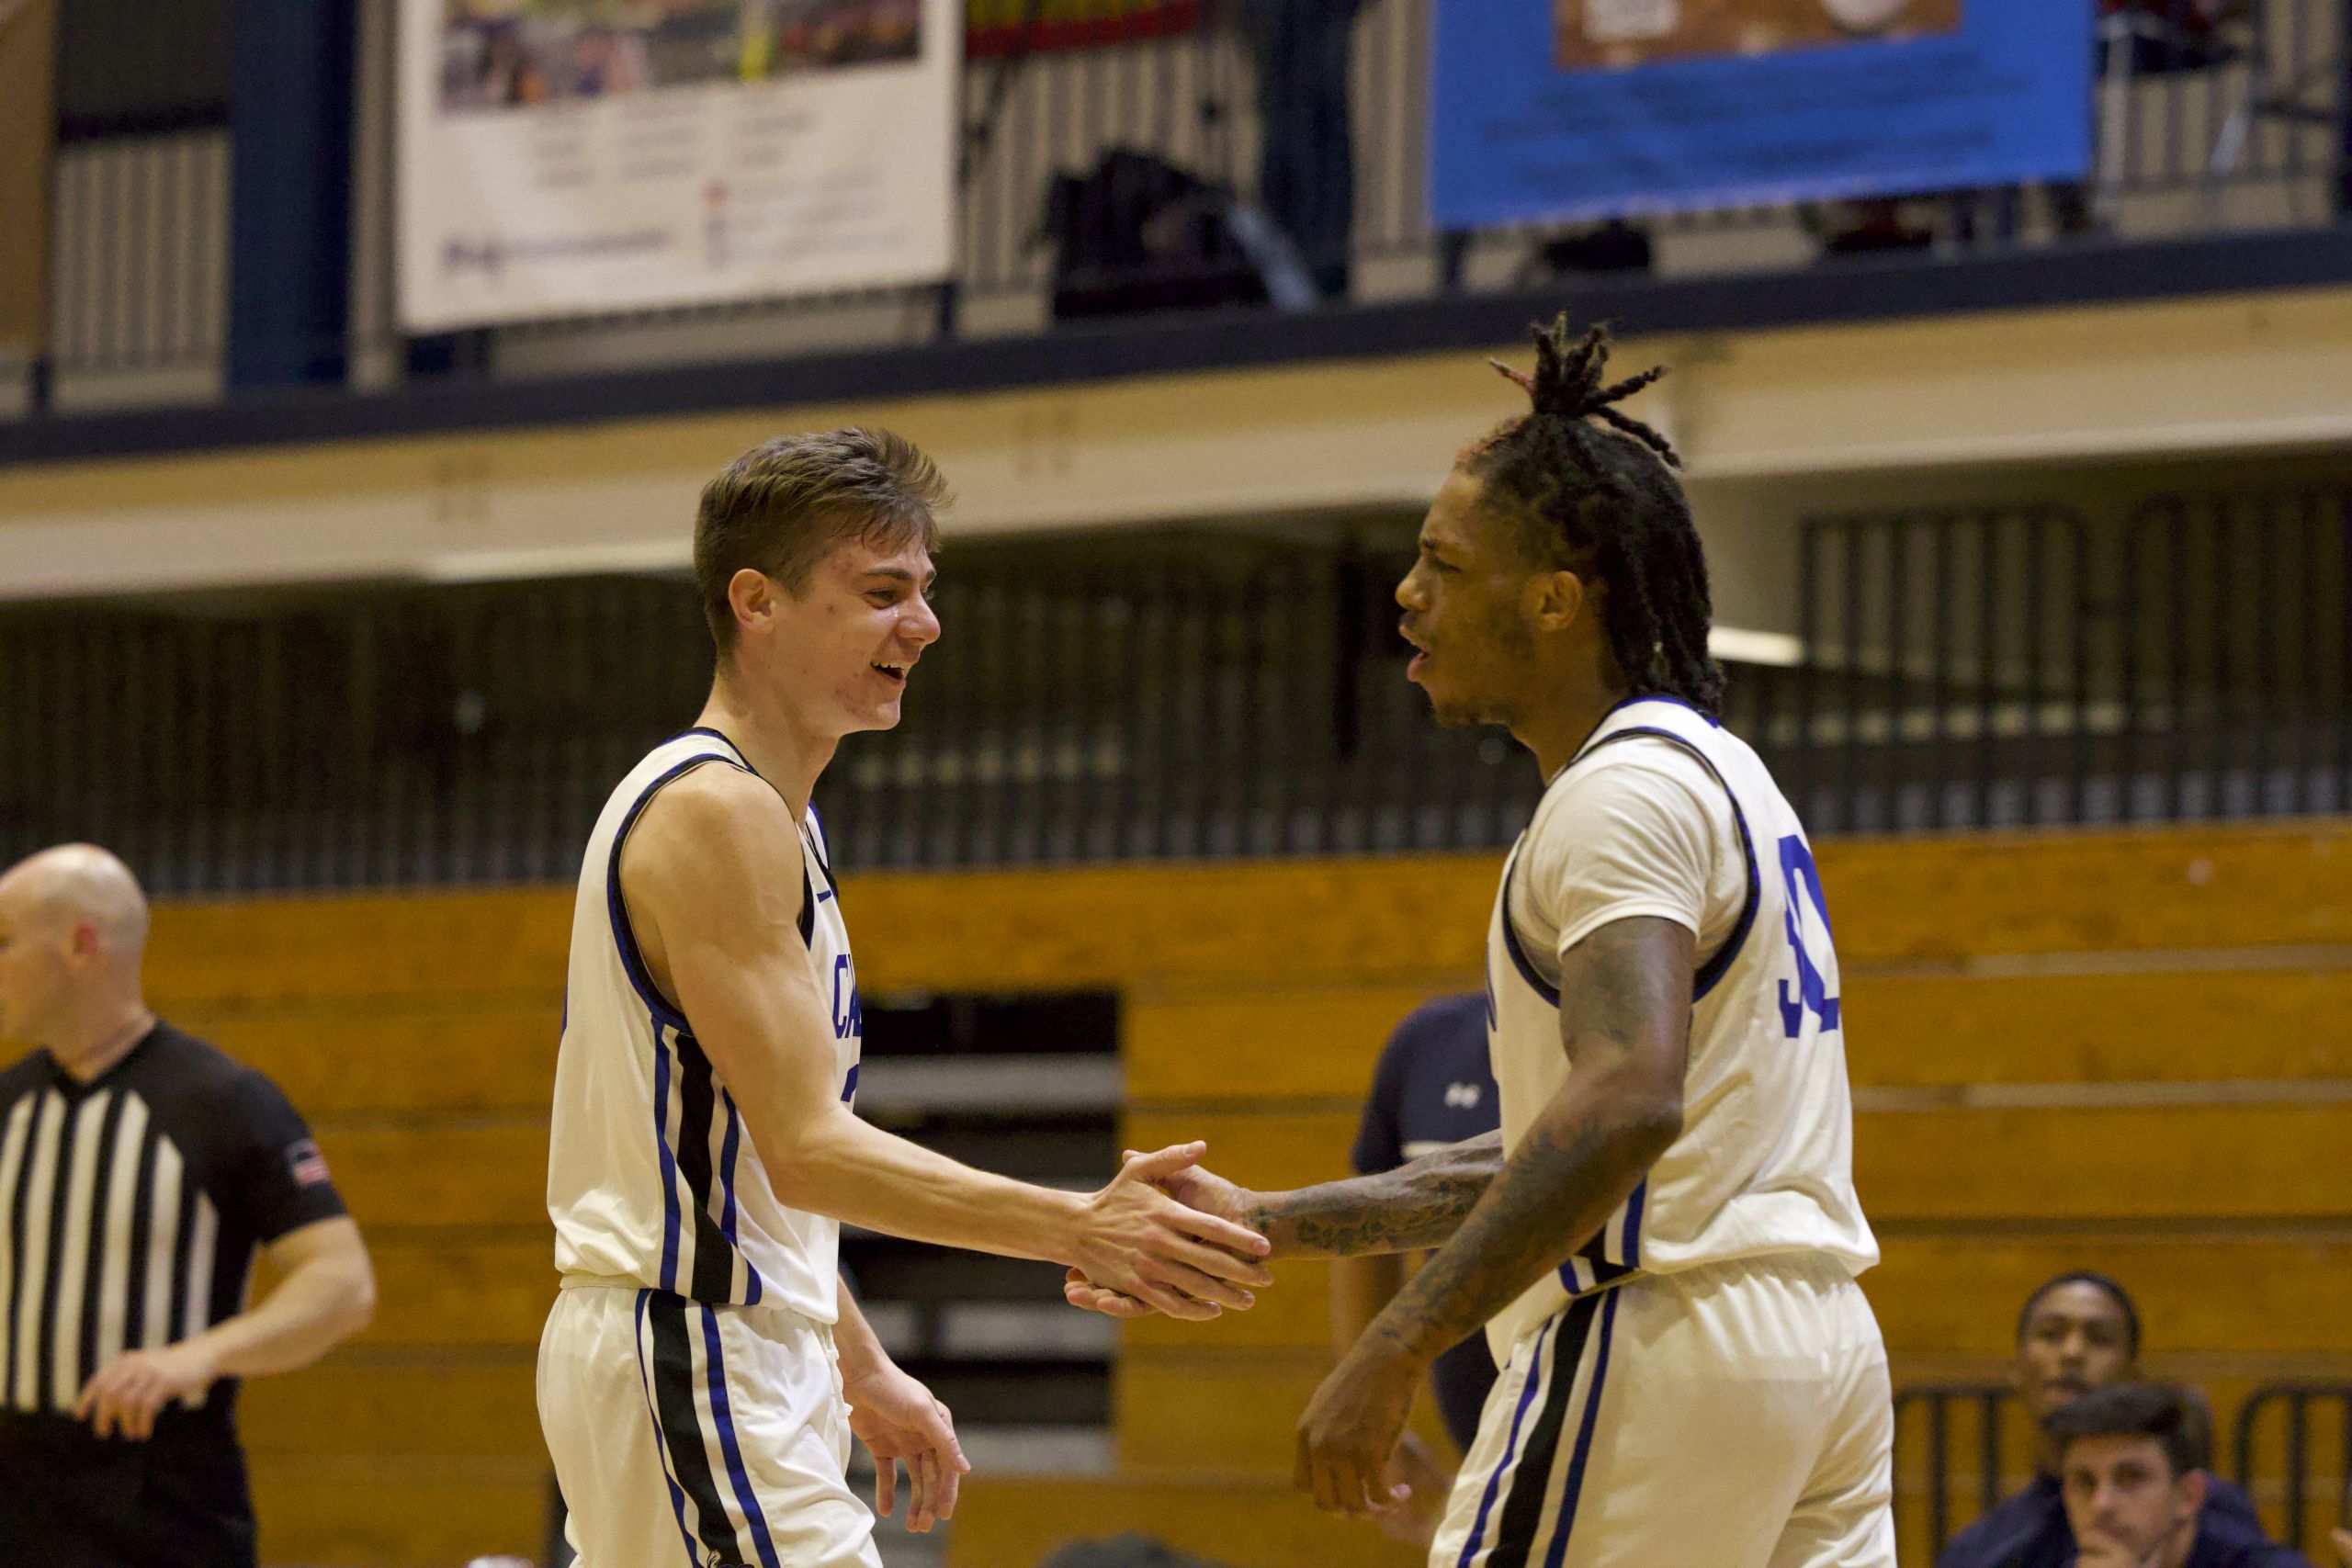 Cabrini players high five after taking lead. Photo by Thomas Ryan.